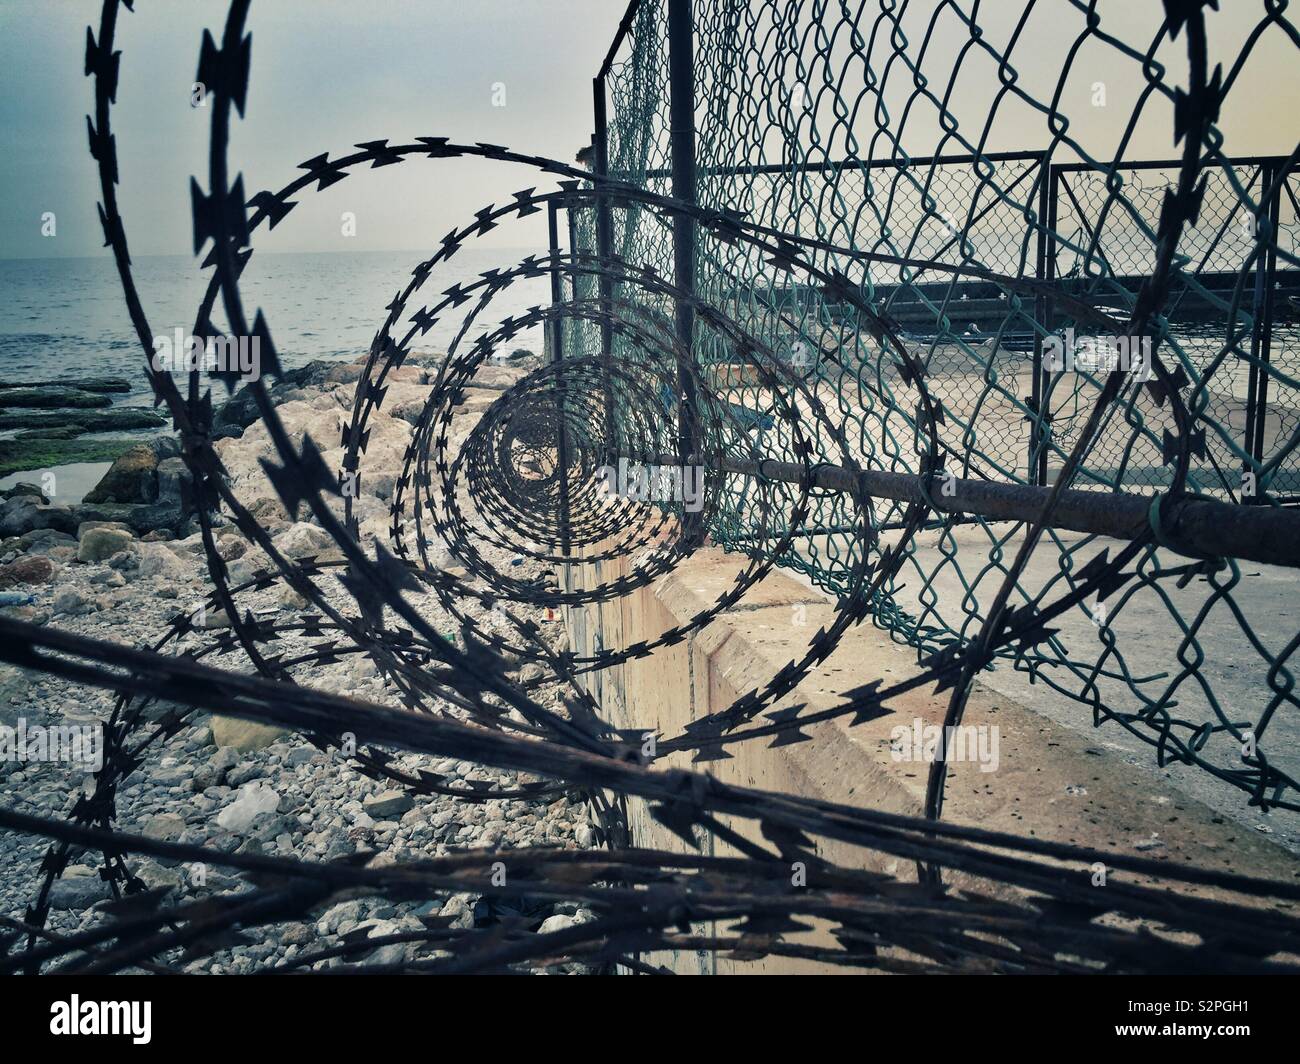 Spiral razor wire and fence on the beach Stock Photo